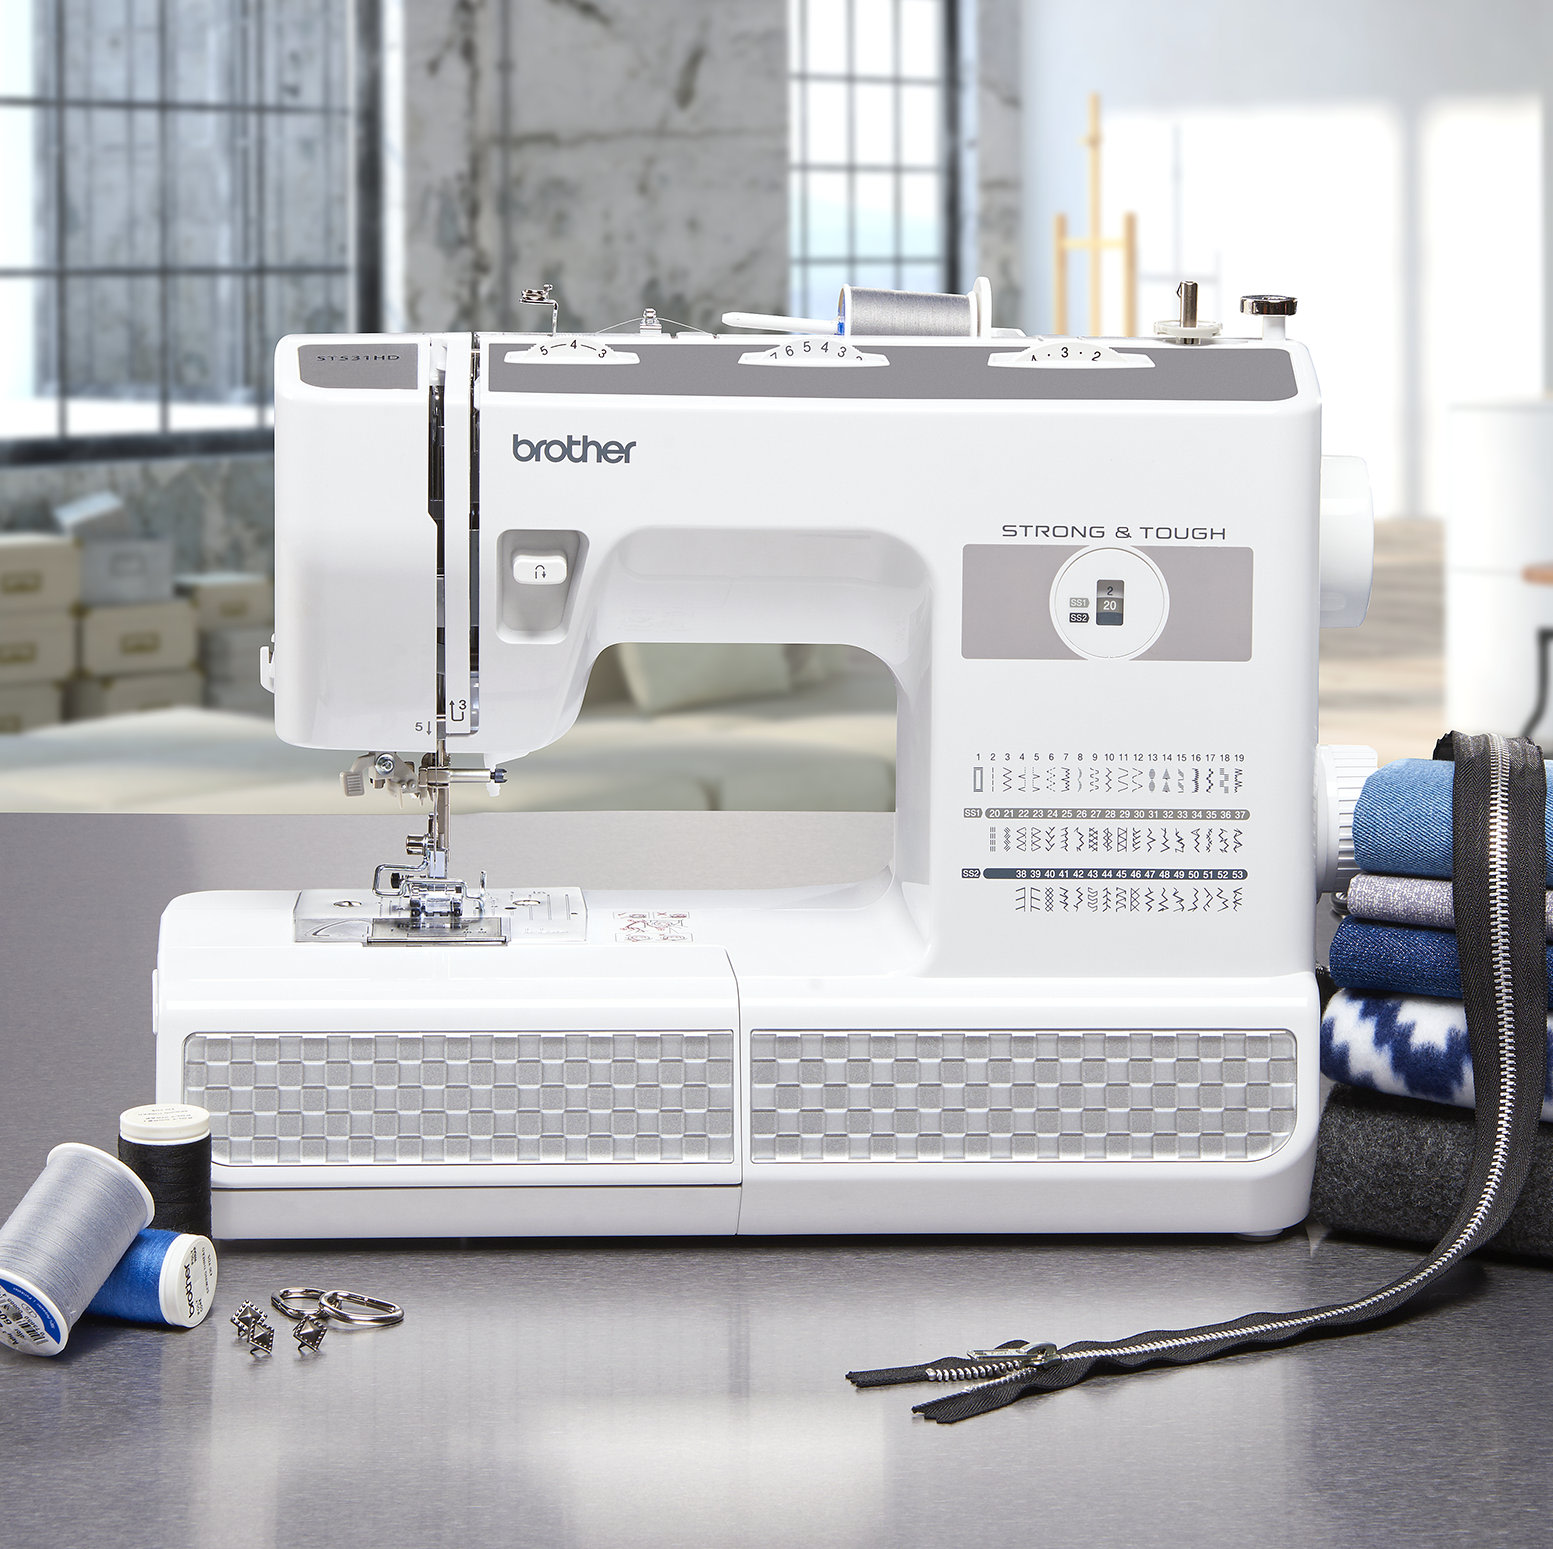 Brother Strong & Tough 53 Stitch Sewing Machine with Finger Guard